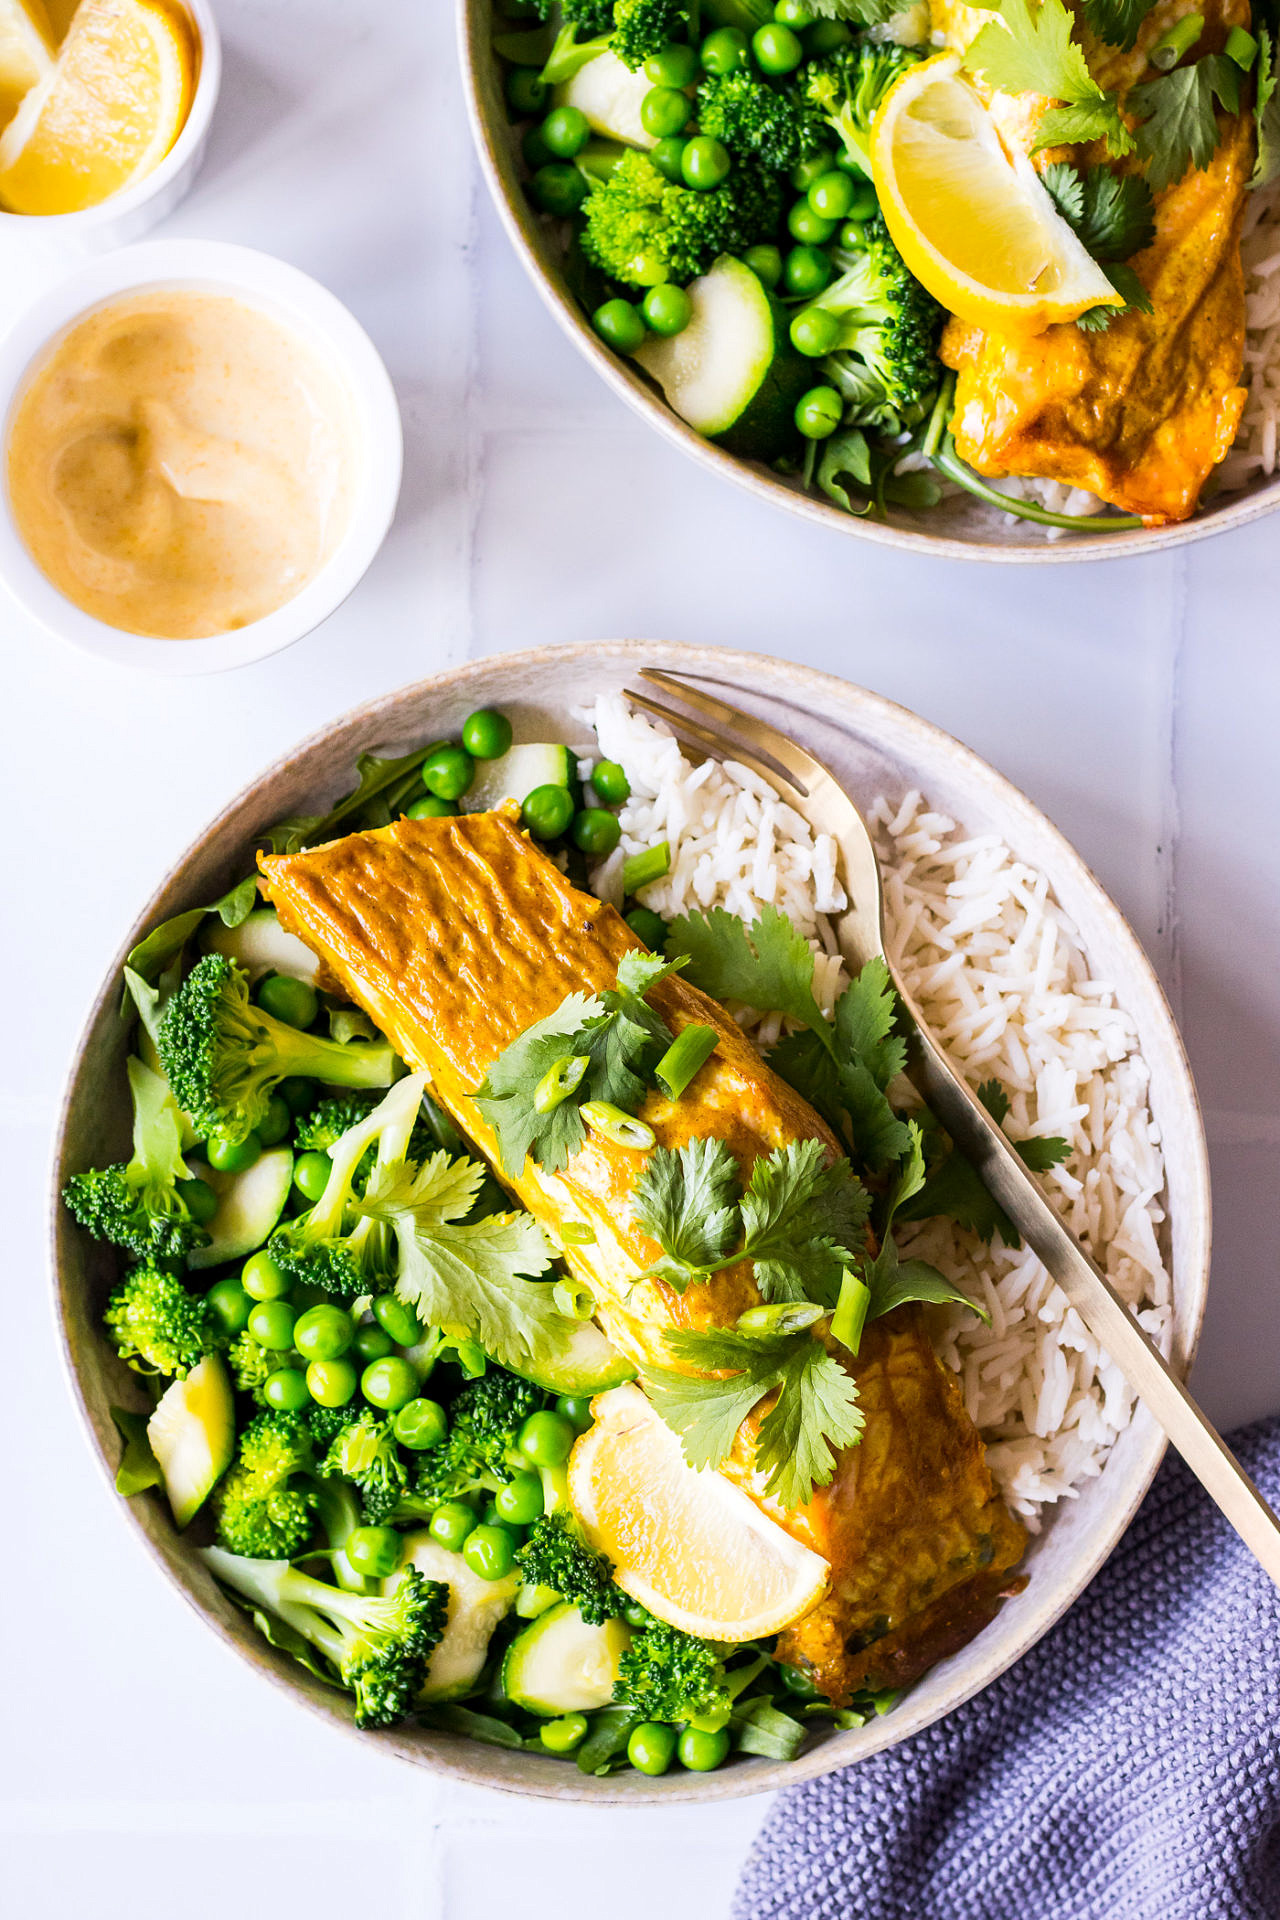 Salmon fillet on top of white rice and green vegetables garnished with coriander, spiced yoghurt in small dish to the side